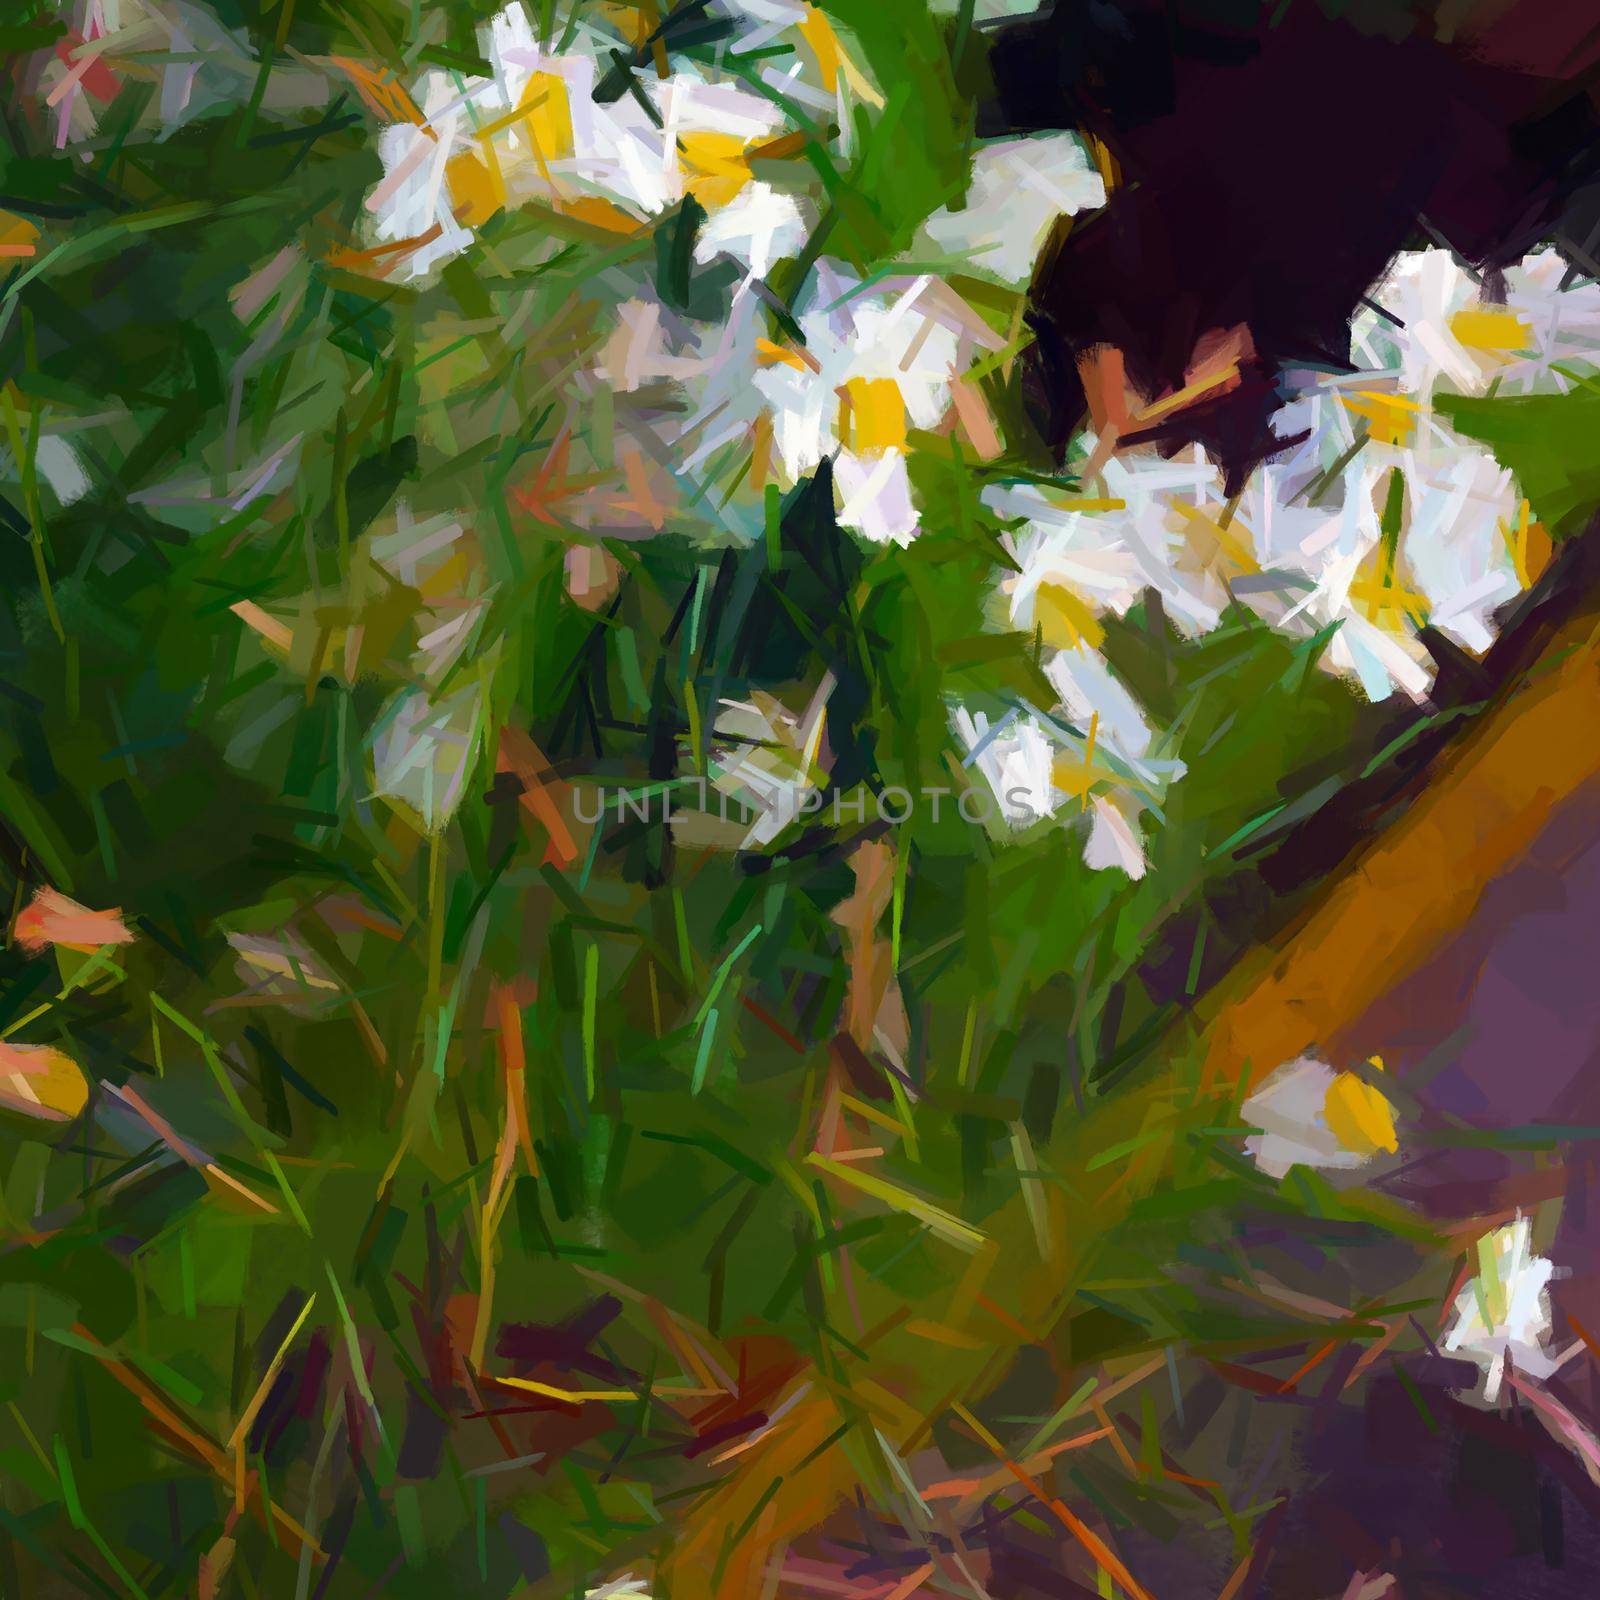 Abstract Daisies floral background, digital painting